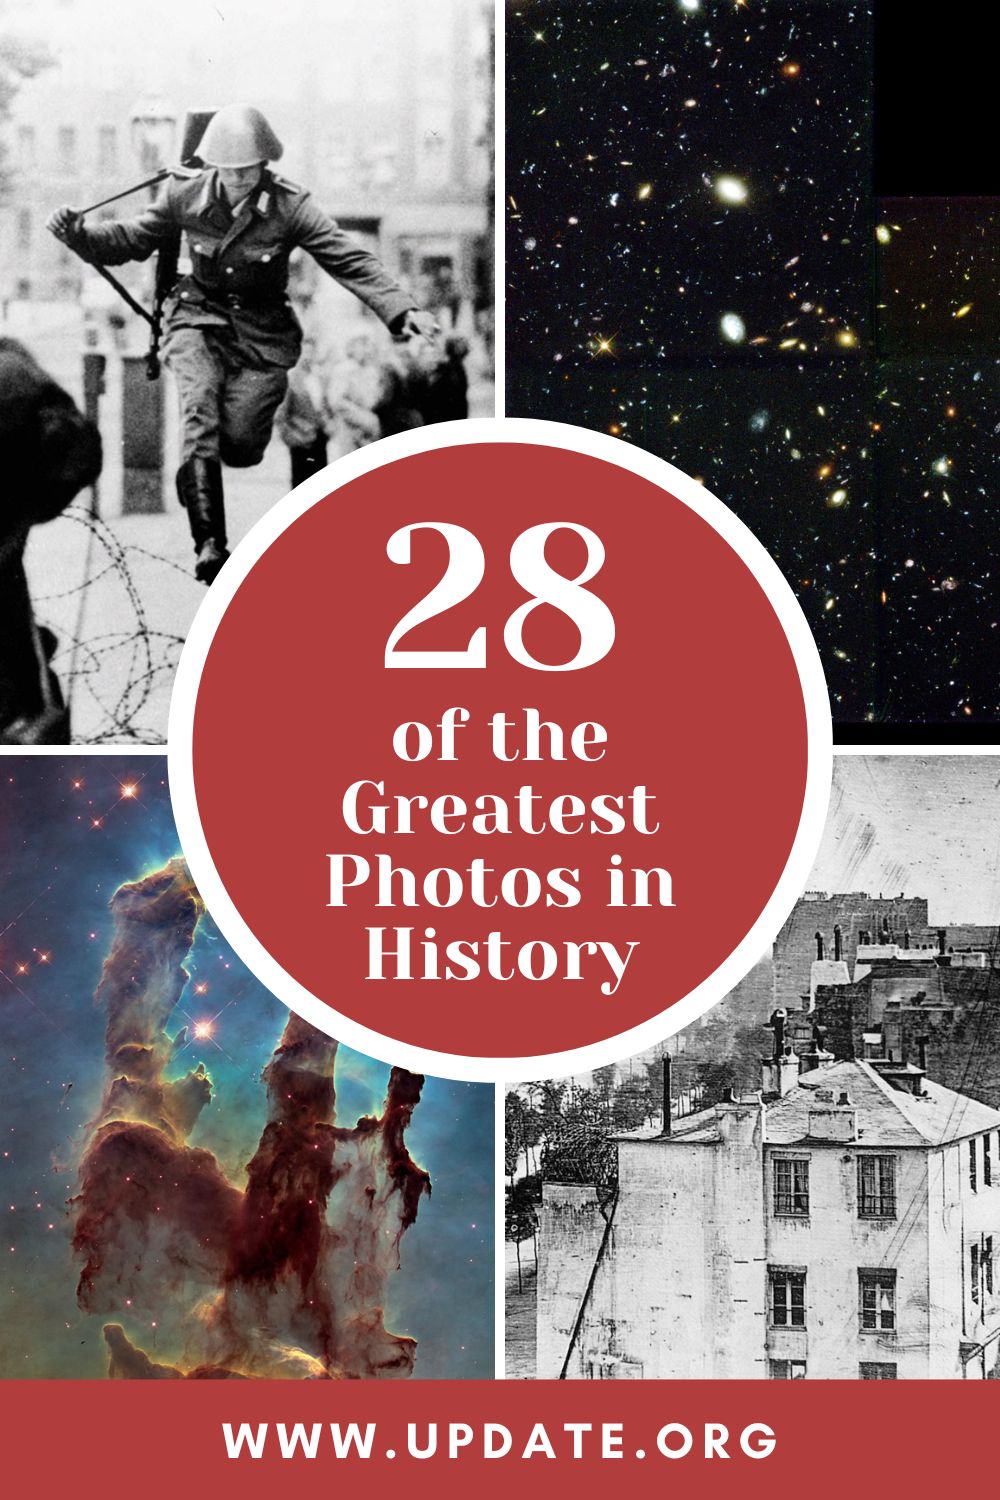 28 of the Greatest Photos in History pinterest image.